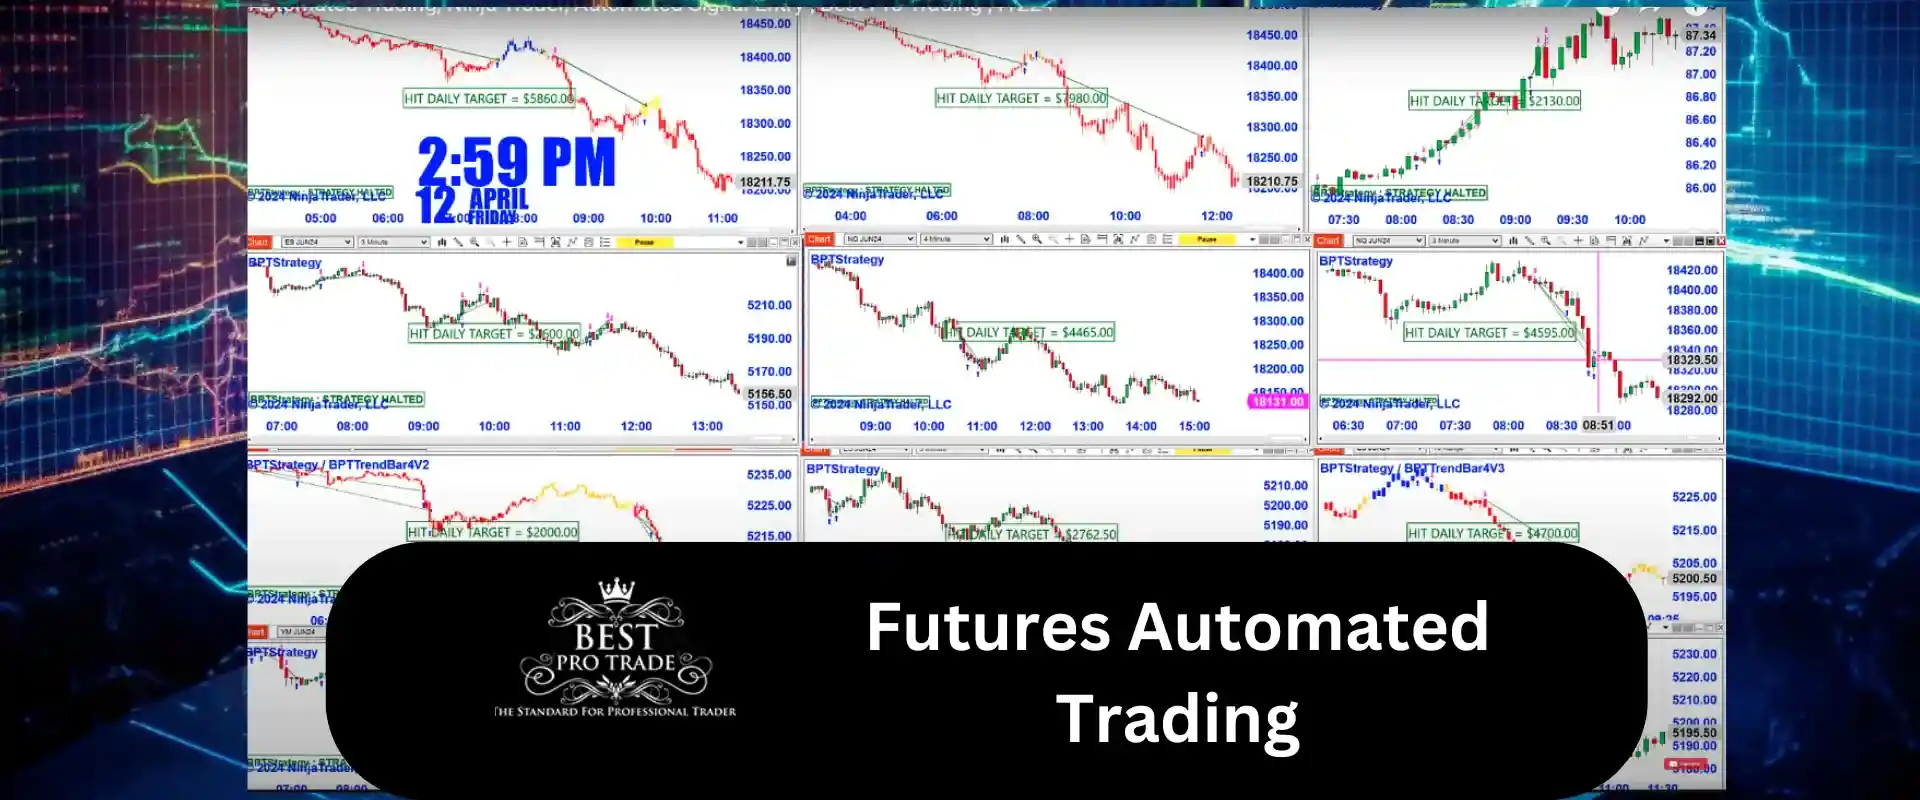 Futures Automated Trading